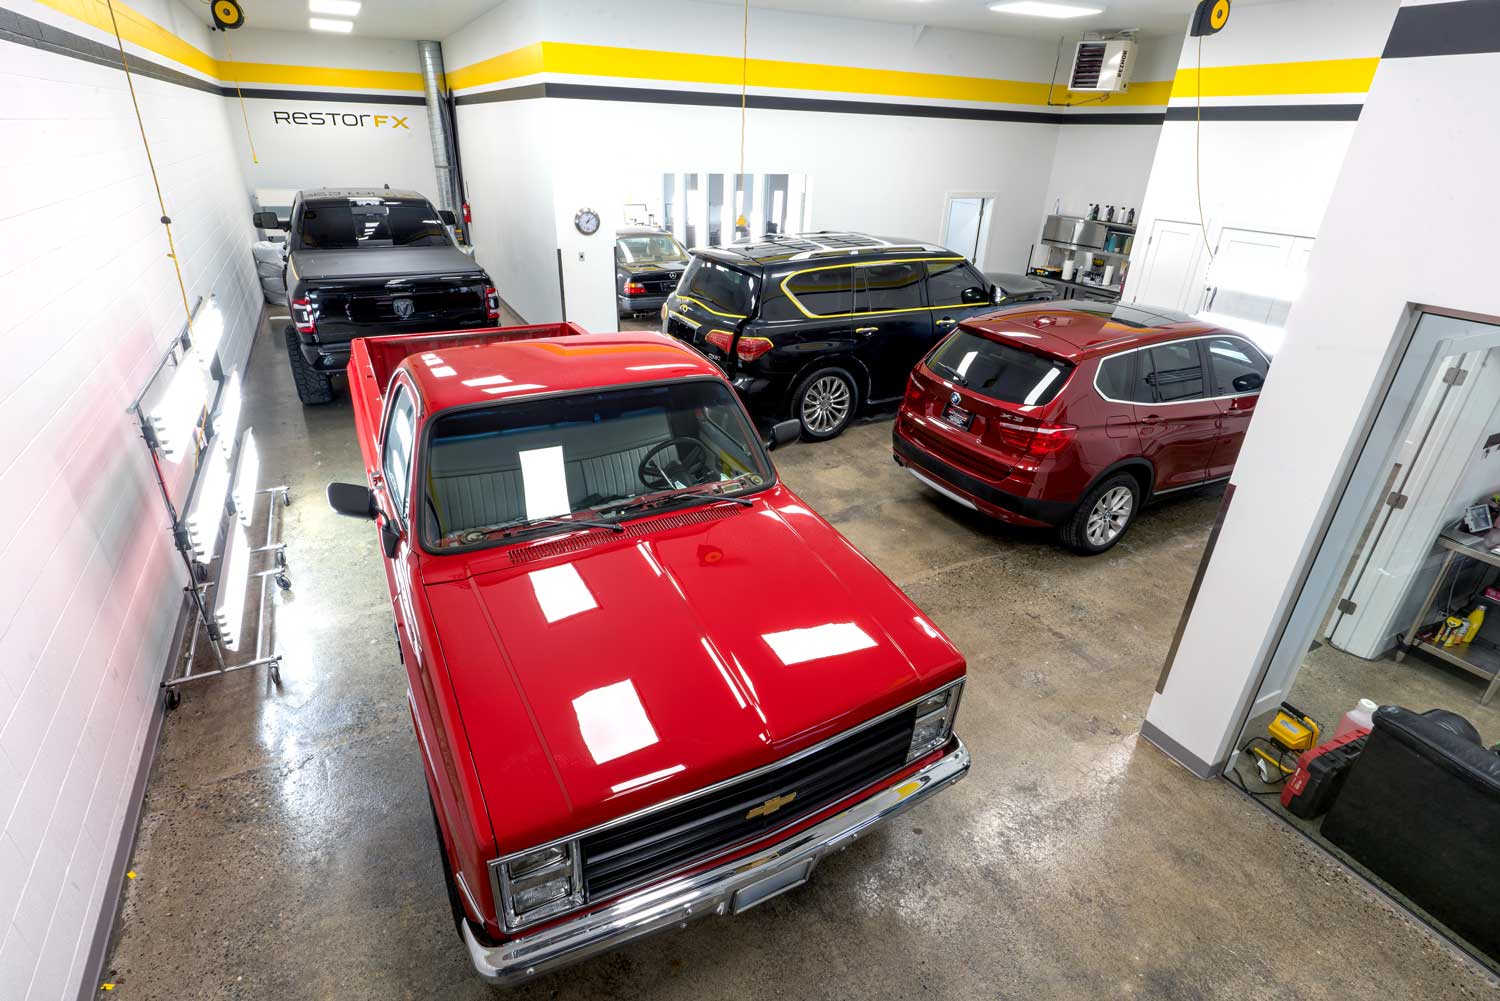 RestorFX shop area with a red Chevy pickup truck, BMW X3 SUV, black Audi SUV and Ram truck